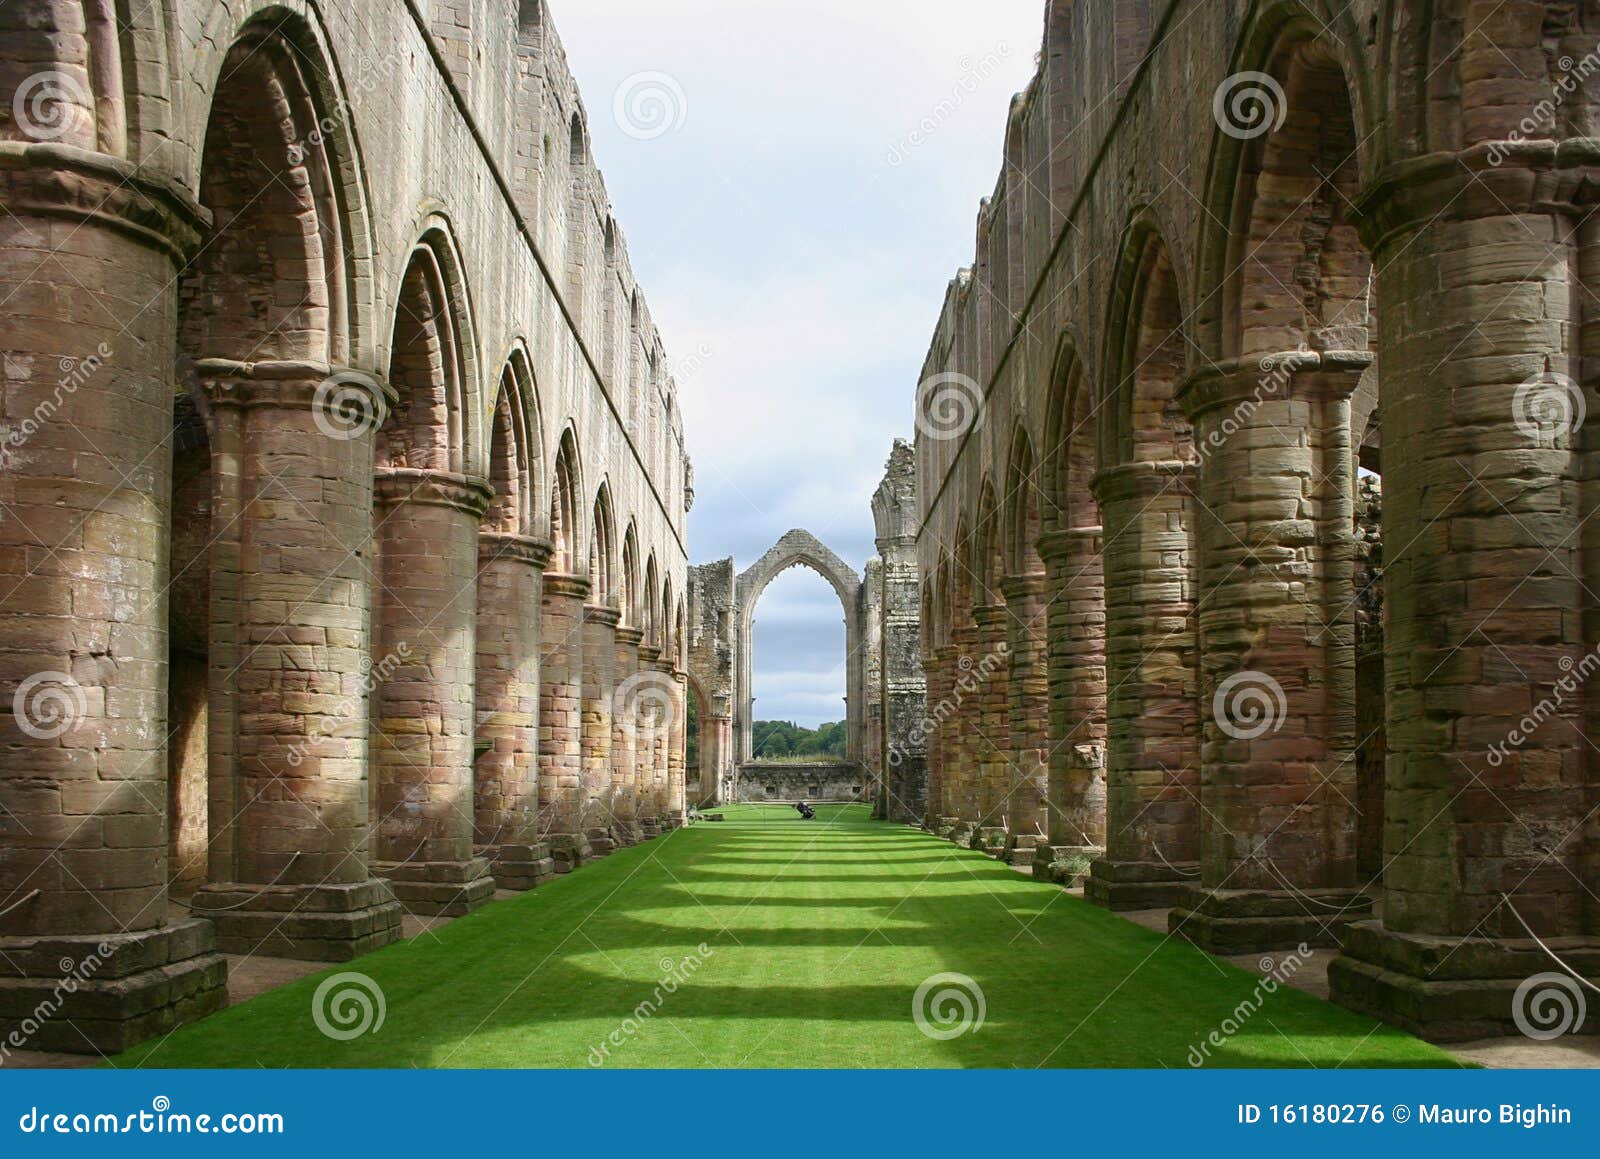 fountains abbey - yorkshire - england